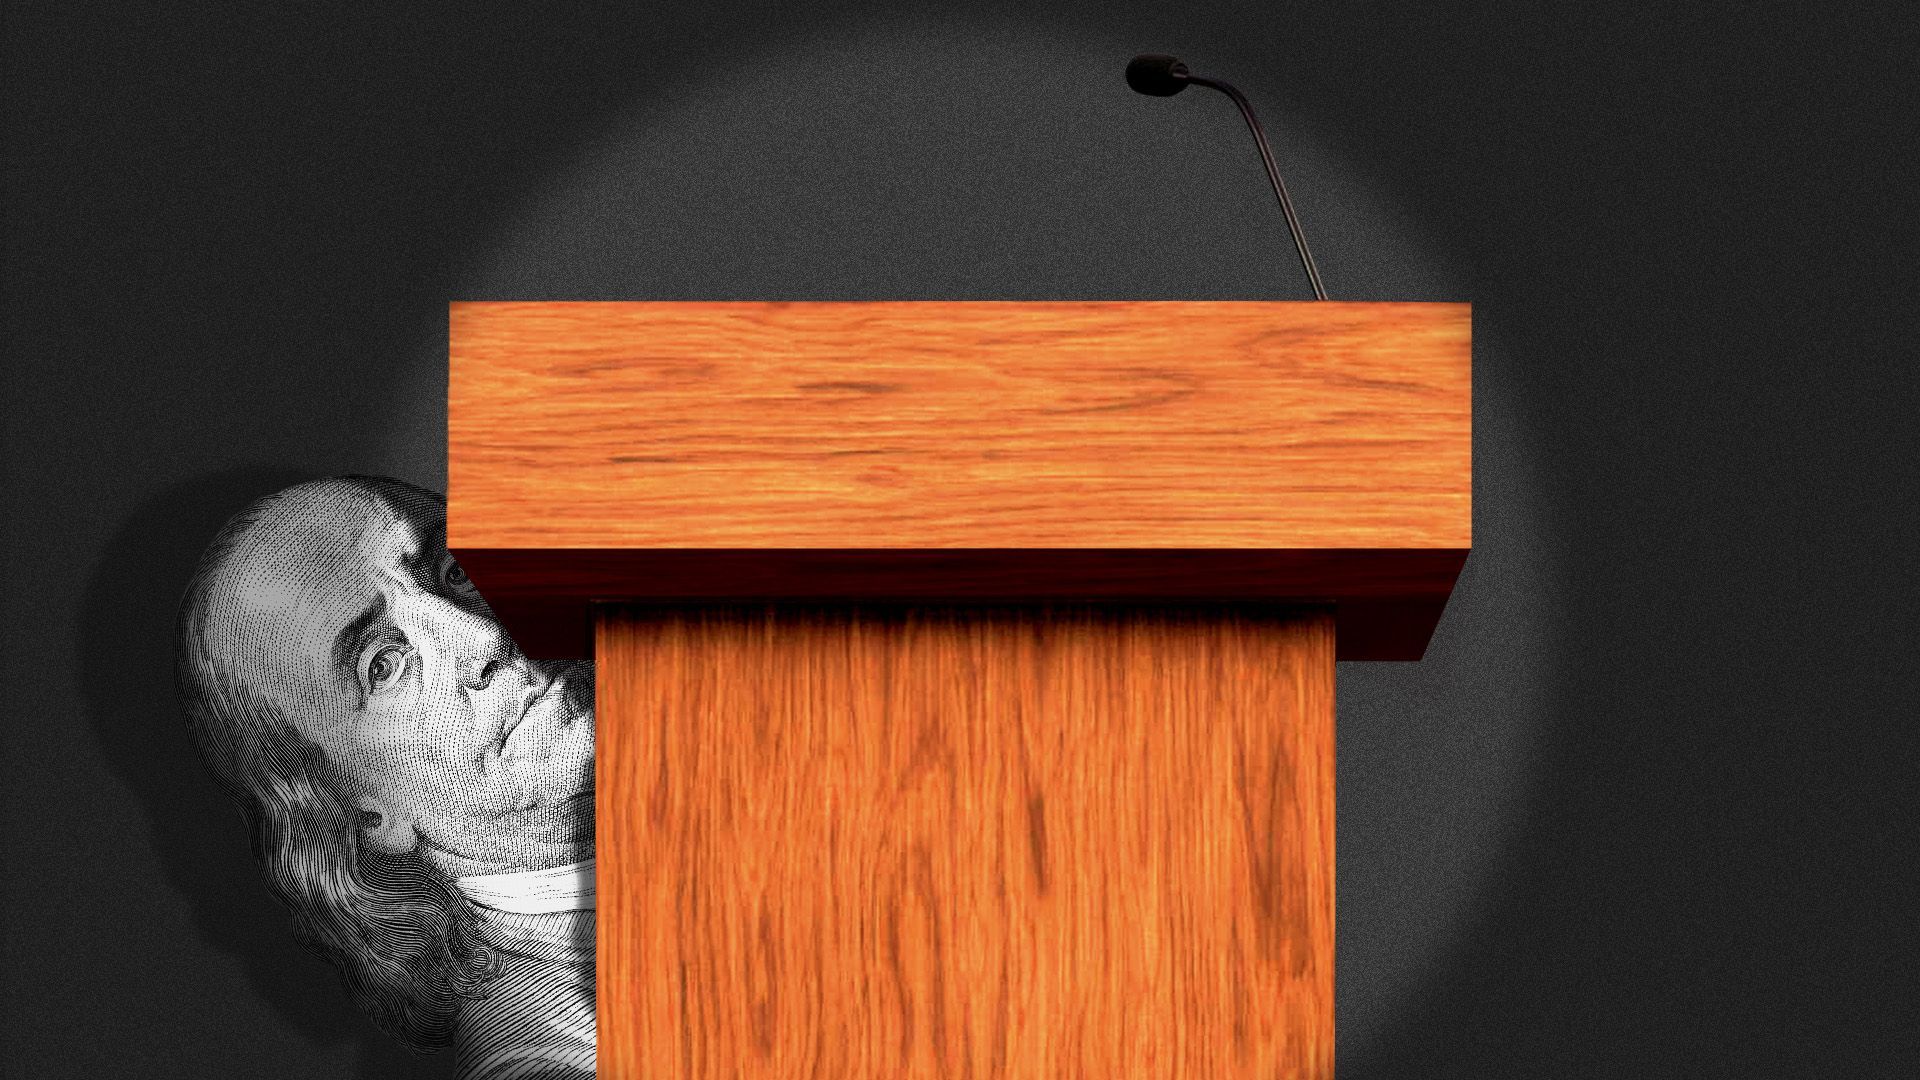 Illustration of Ben Franklin from a hundred dollar bill peeking out behind a podium with a spotlight on it